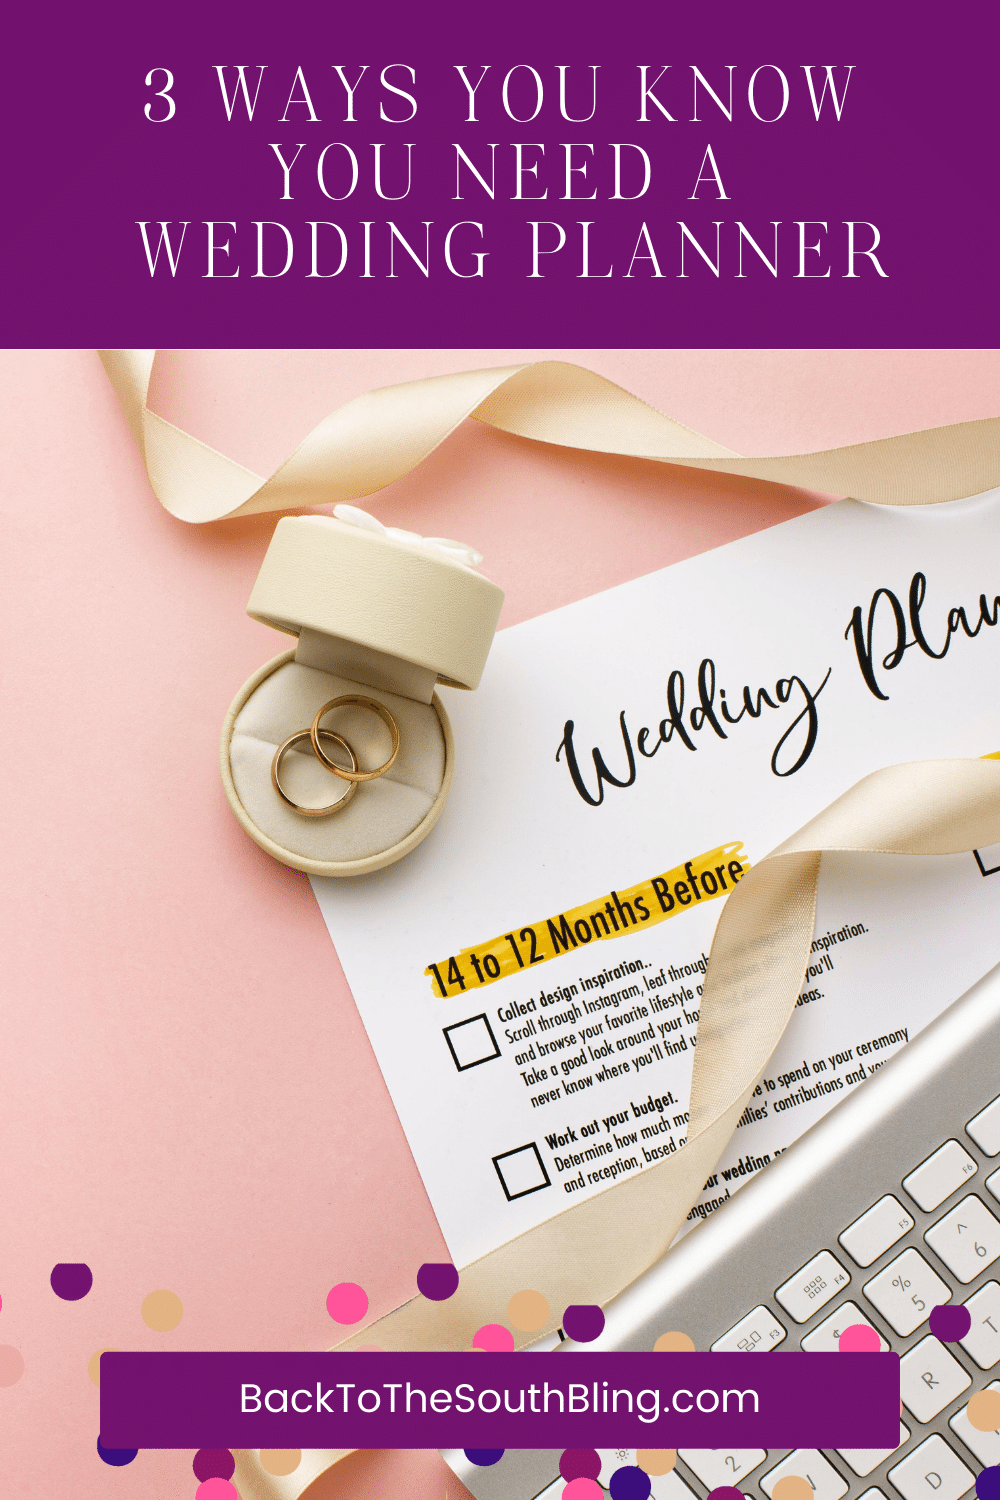 How to know you need a wedding planner